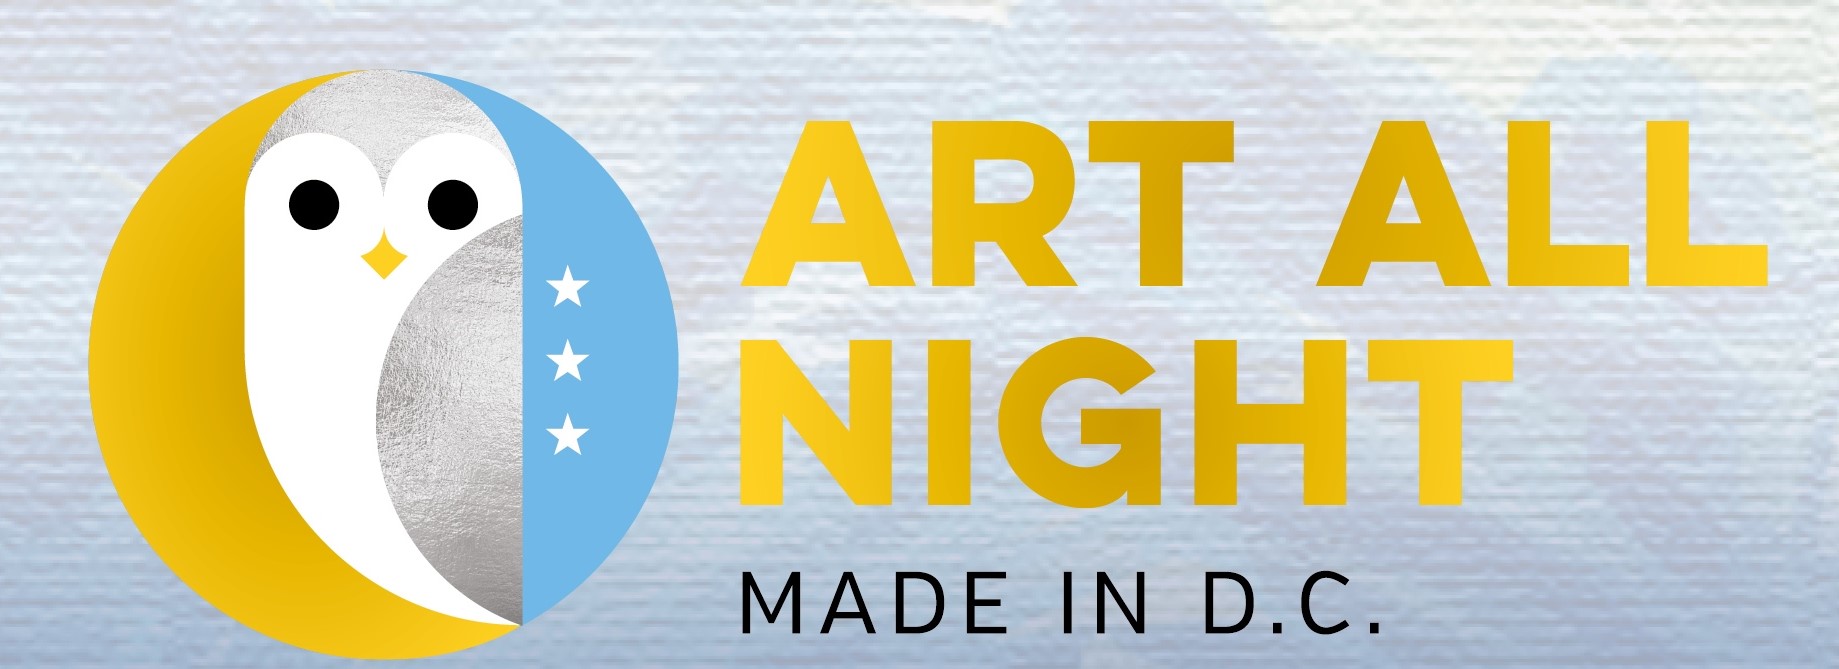 Art All Night: Made in D.C.